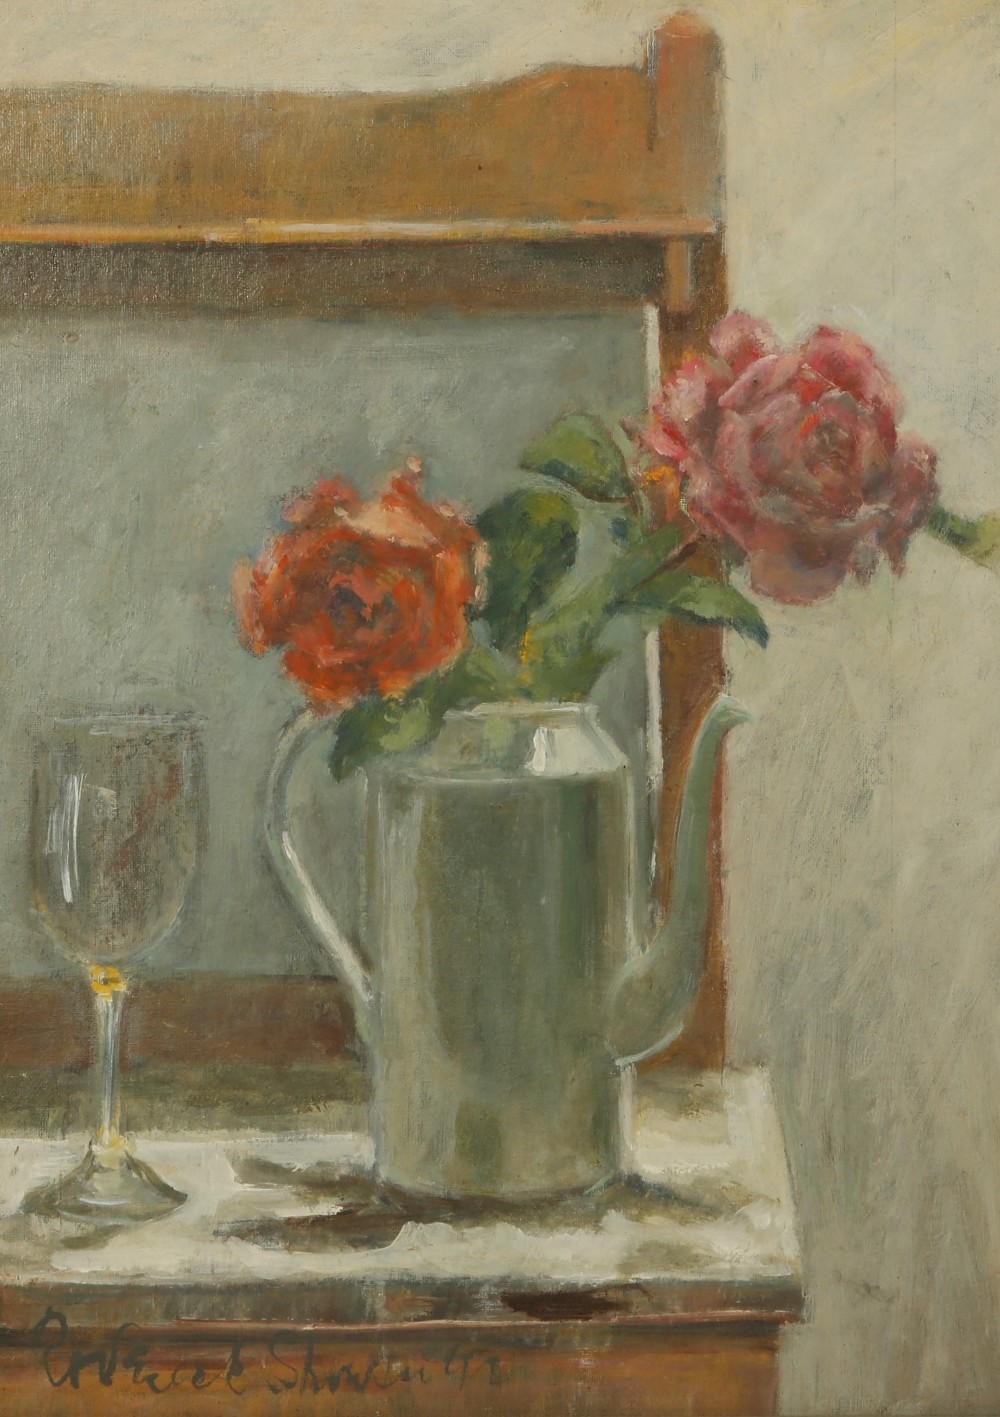 RODERICK SHOWAN, 20th century A still life study of roses in a coffee pot, signed lower left and